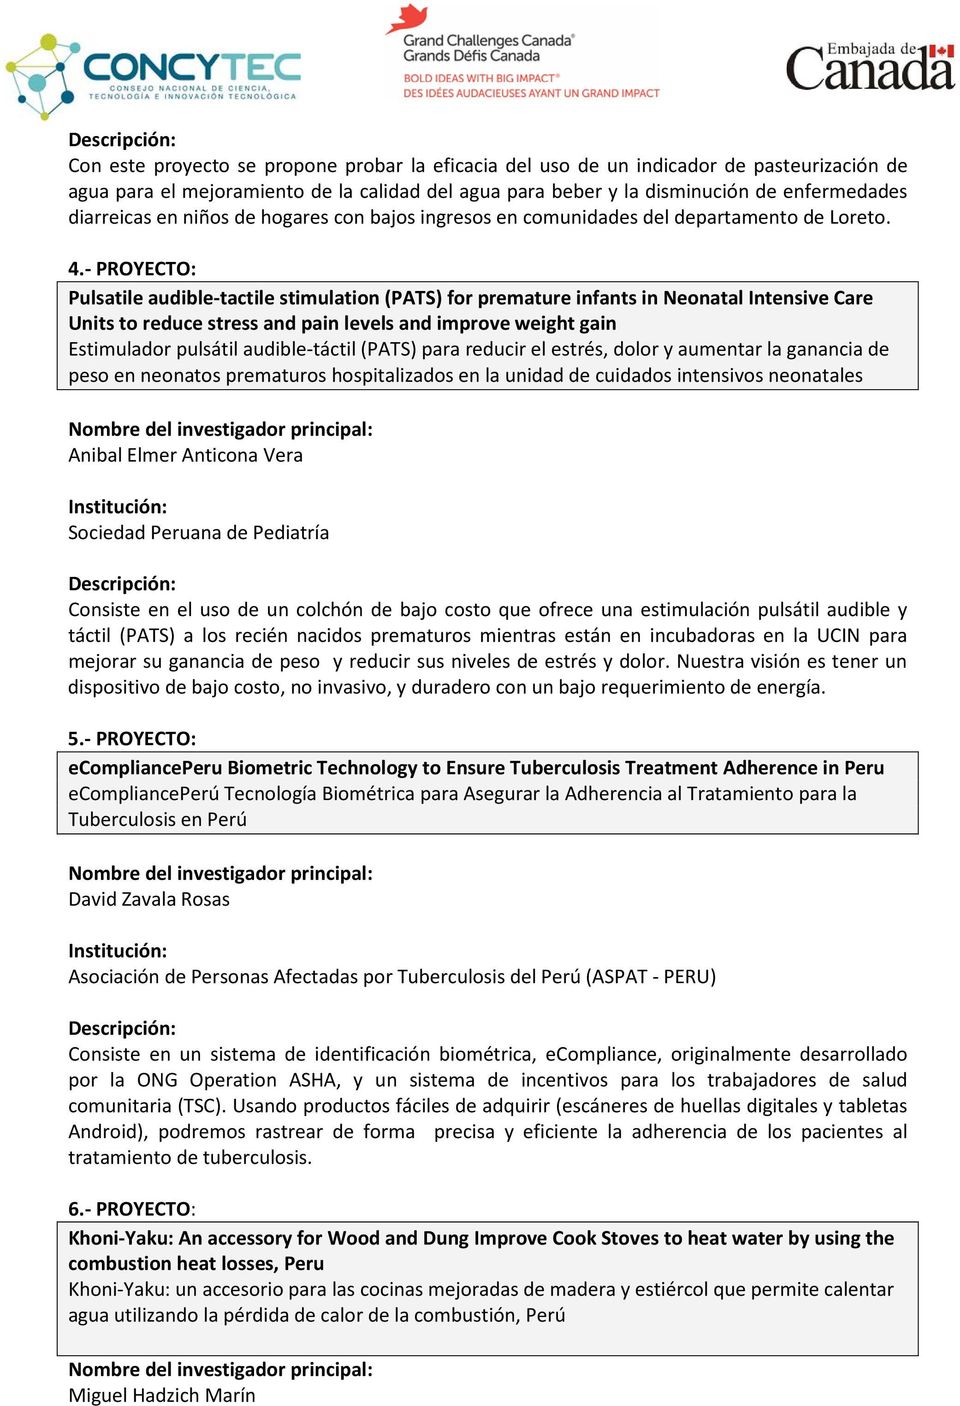 - PROYECTO: Pulsatile audible-tactile stimulation (PATS) for premature infants in Neonatal Intensive Care Units to reduce stress and pain levels and improve weight gain Estimulador pulsátil